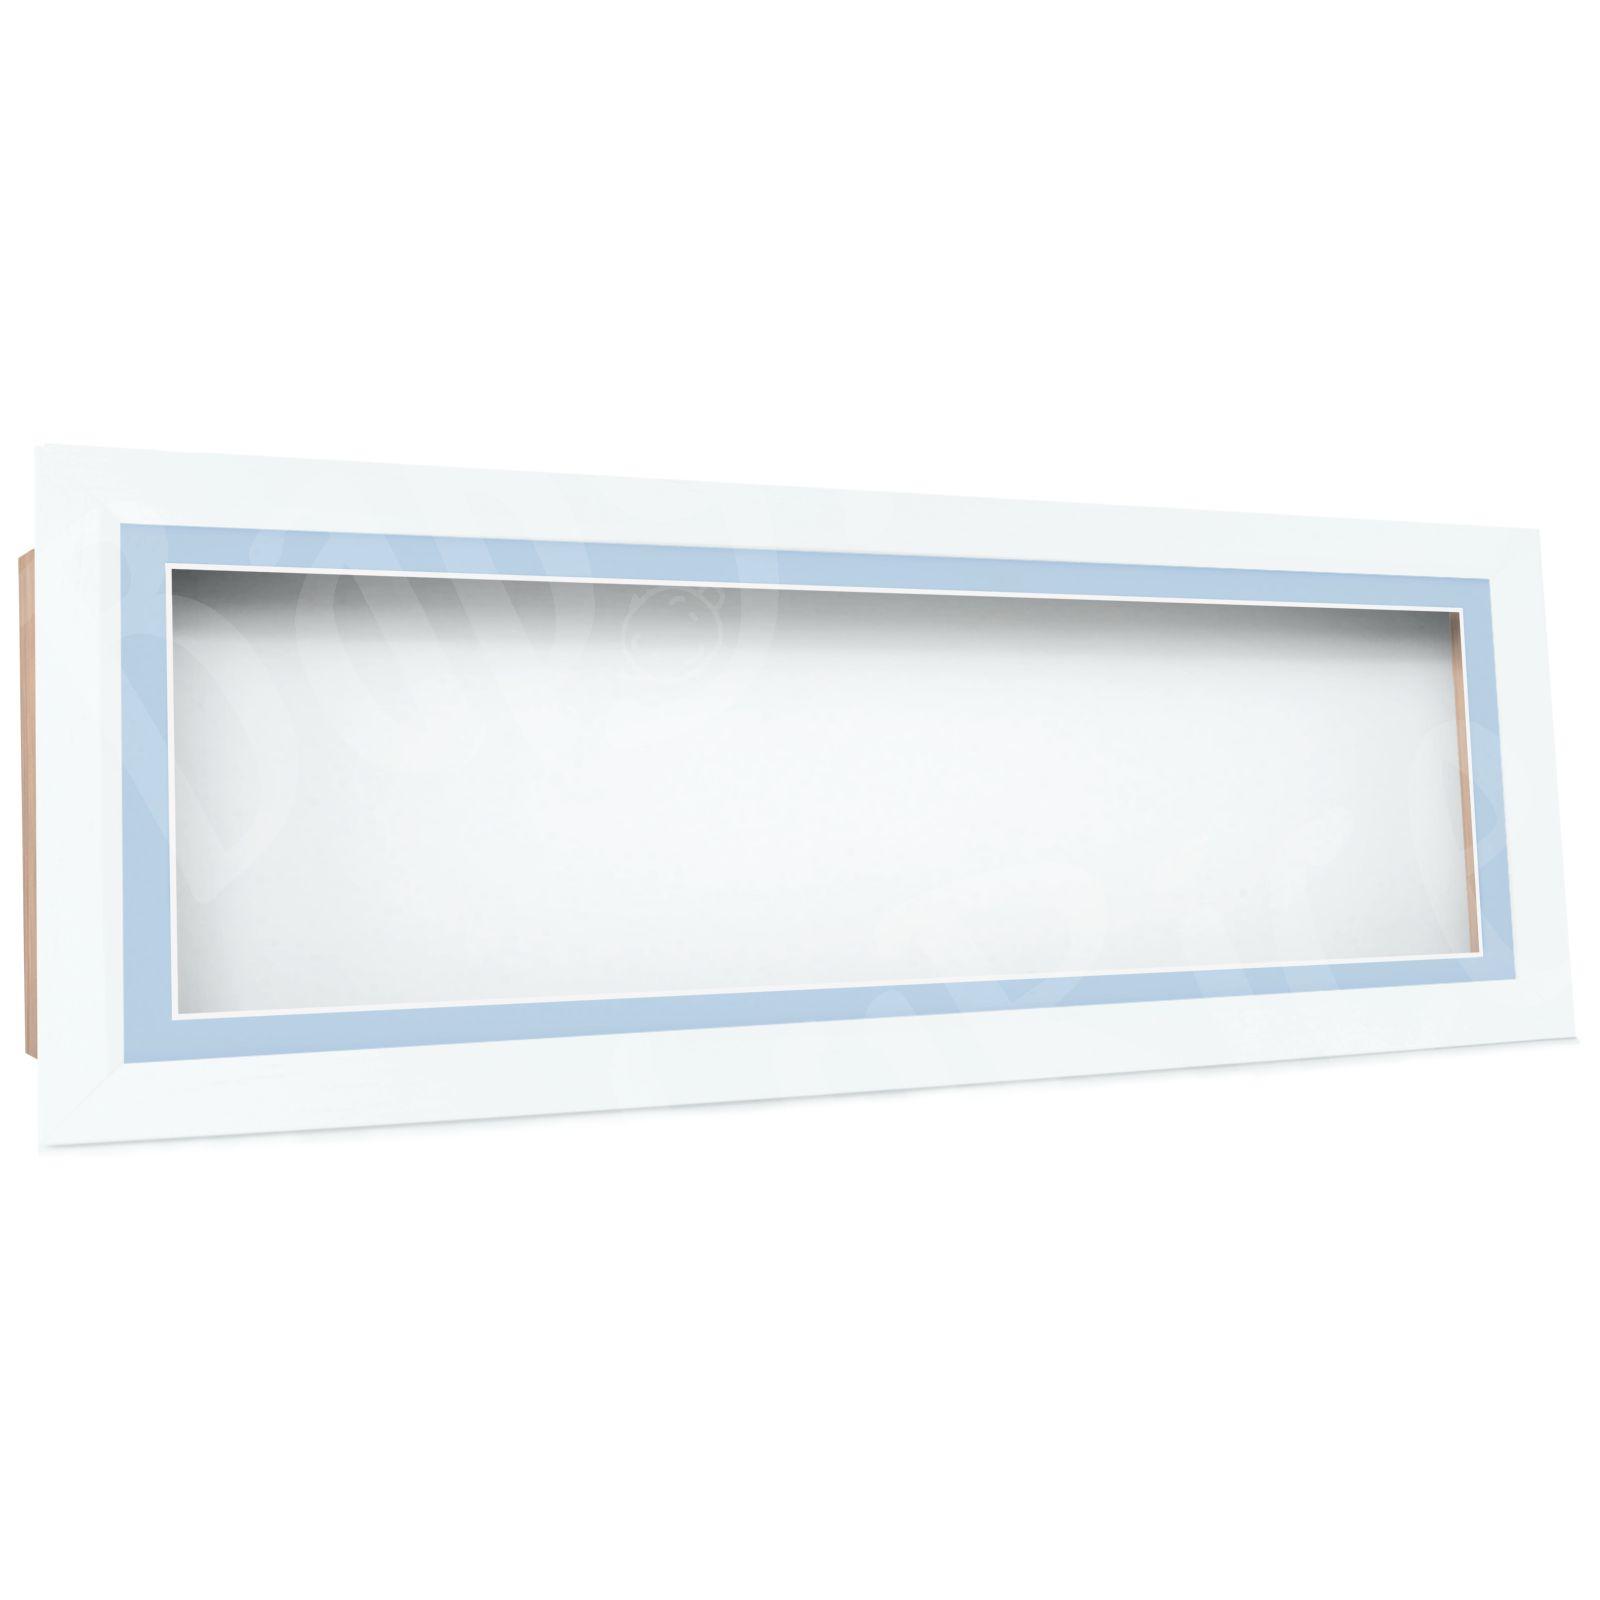 Large Long Wooden White Object Frame